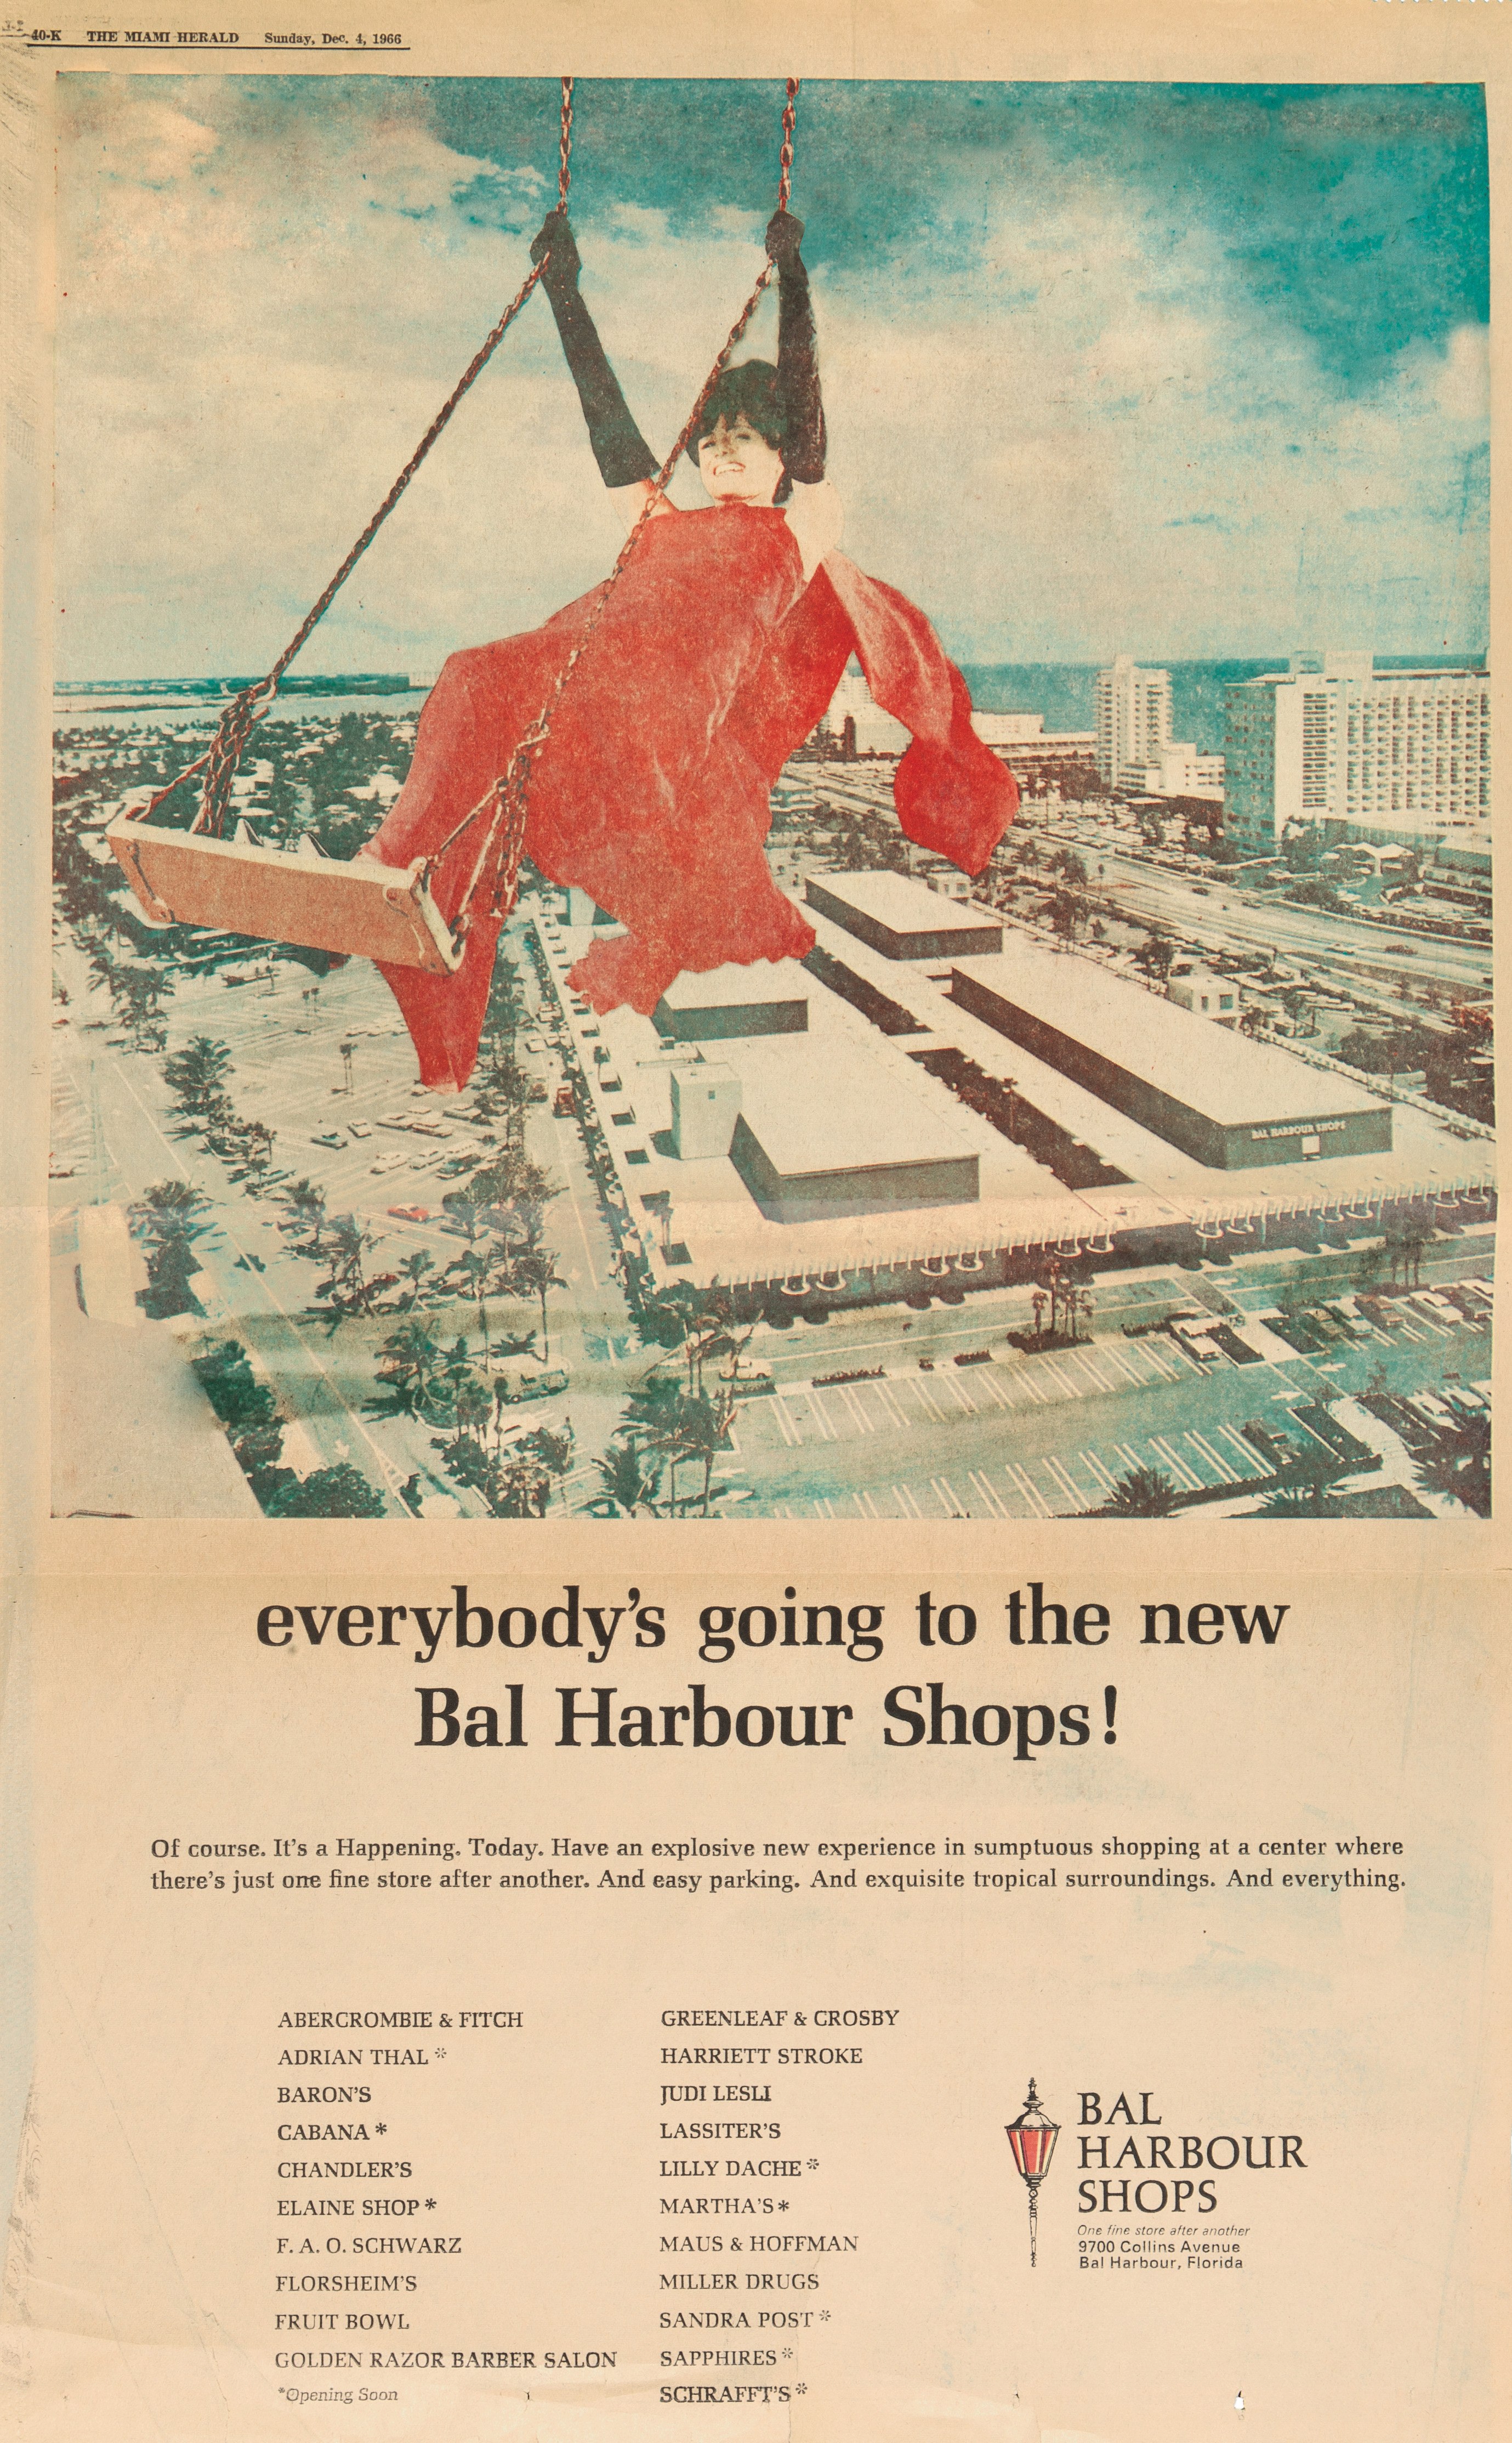 Full-page ad for Bal Harbour Shops in The Miami Herald from December 4, 1966 depicting an image of the woman in a red dress swinging above the Shops